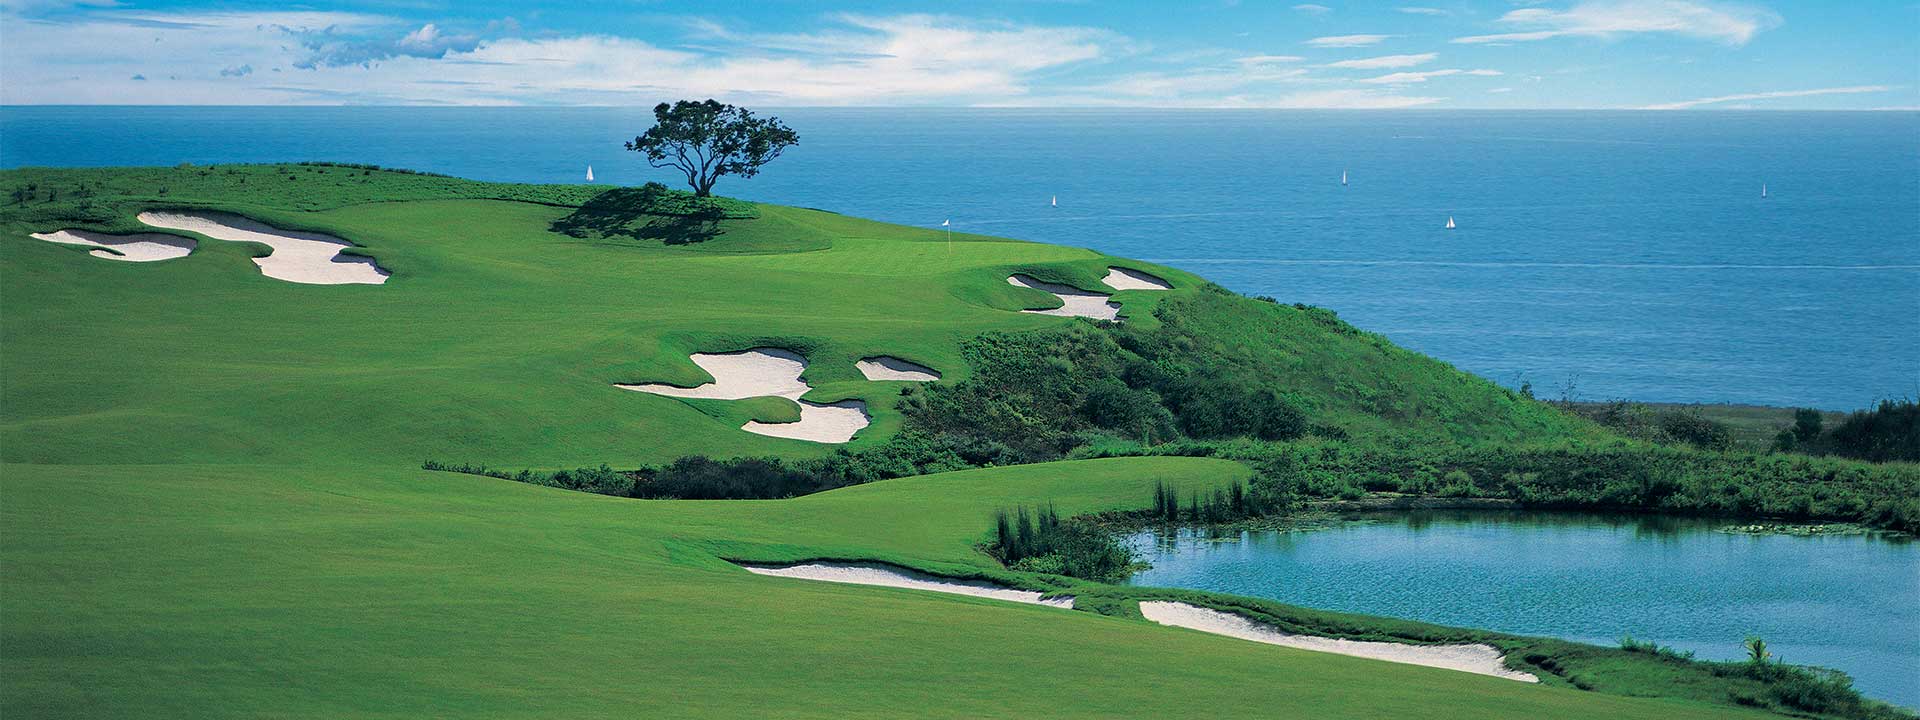 The 17th hole of the Ocean North Course at The Resort at Pelican Hill.